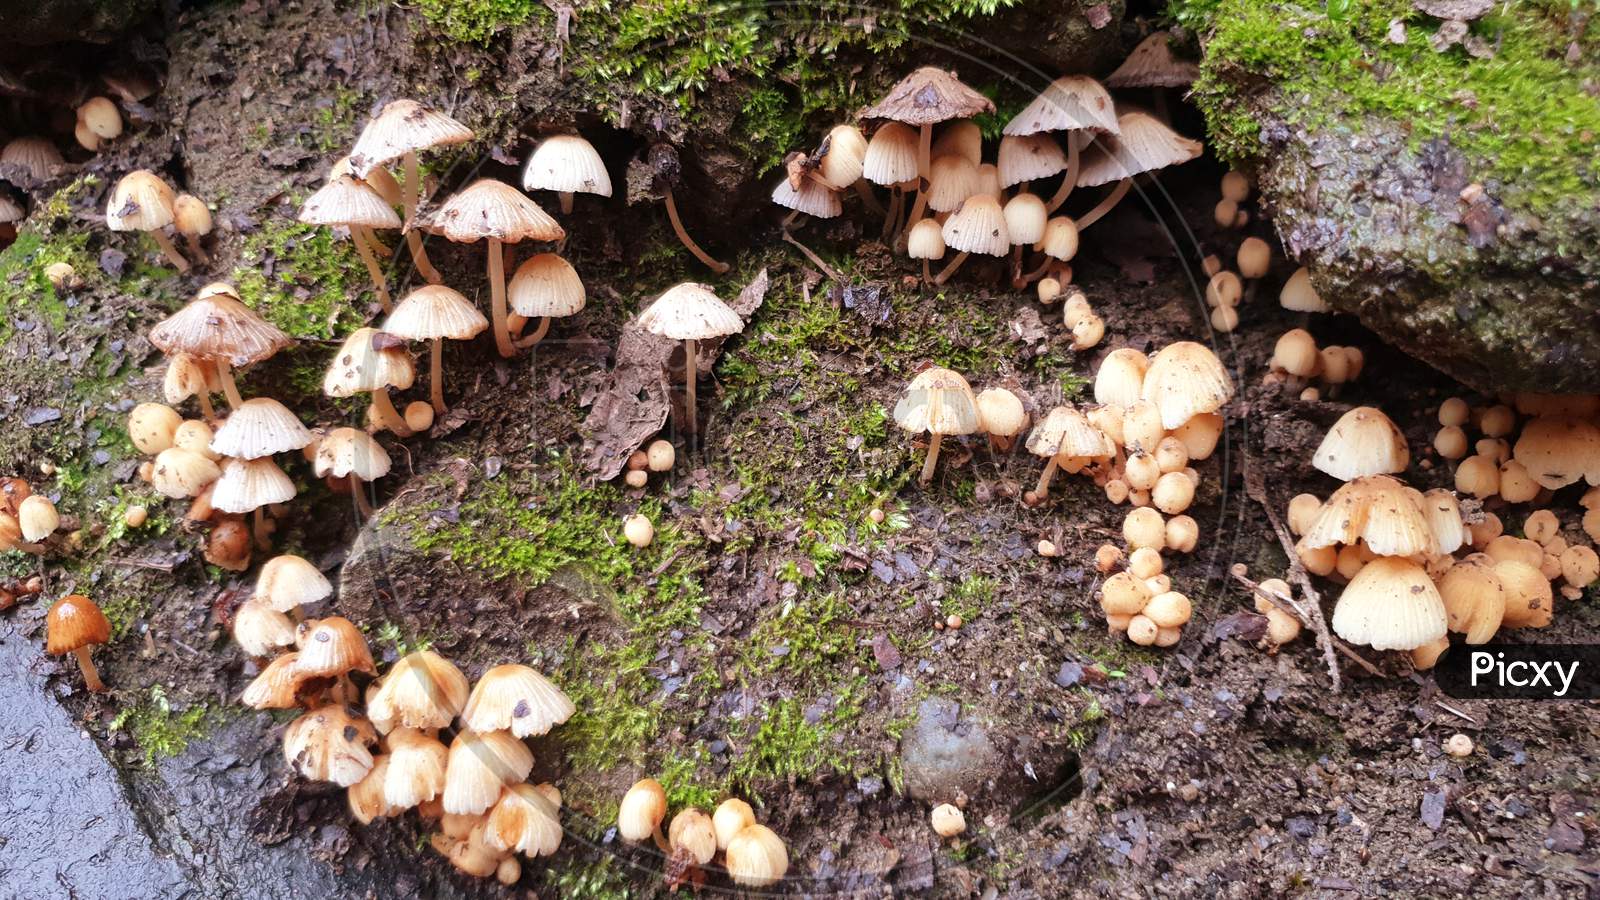 Mushrooms Get Disgusting Way Before They Sprout Other Fungi. Interested In Growing Fungi. Fungiculture Is The Cultivation Of Mushrooms And Other Fungi Fresh, Grown Mushrooms Are Delicious Fun To Grow